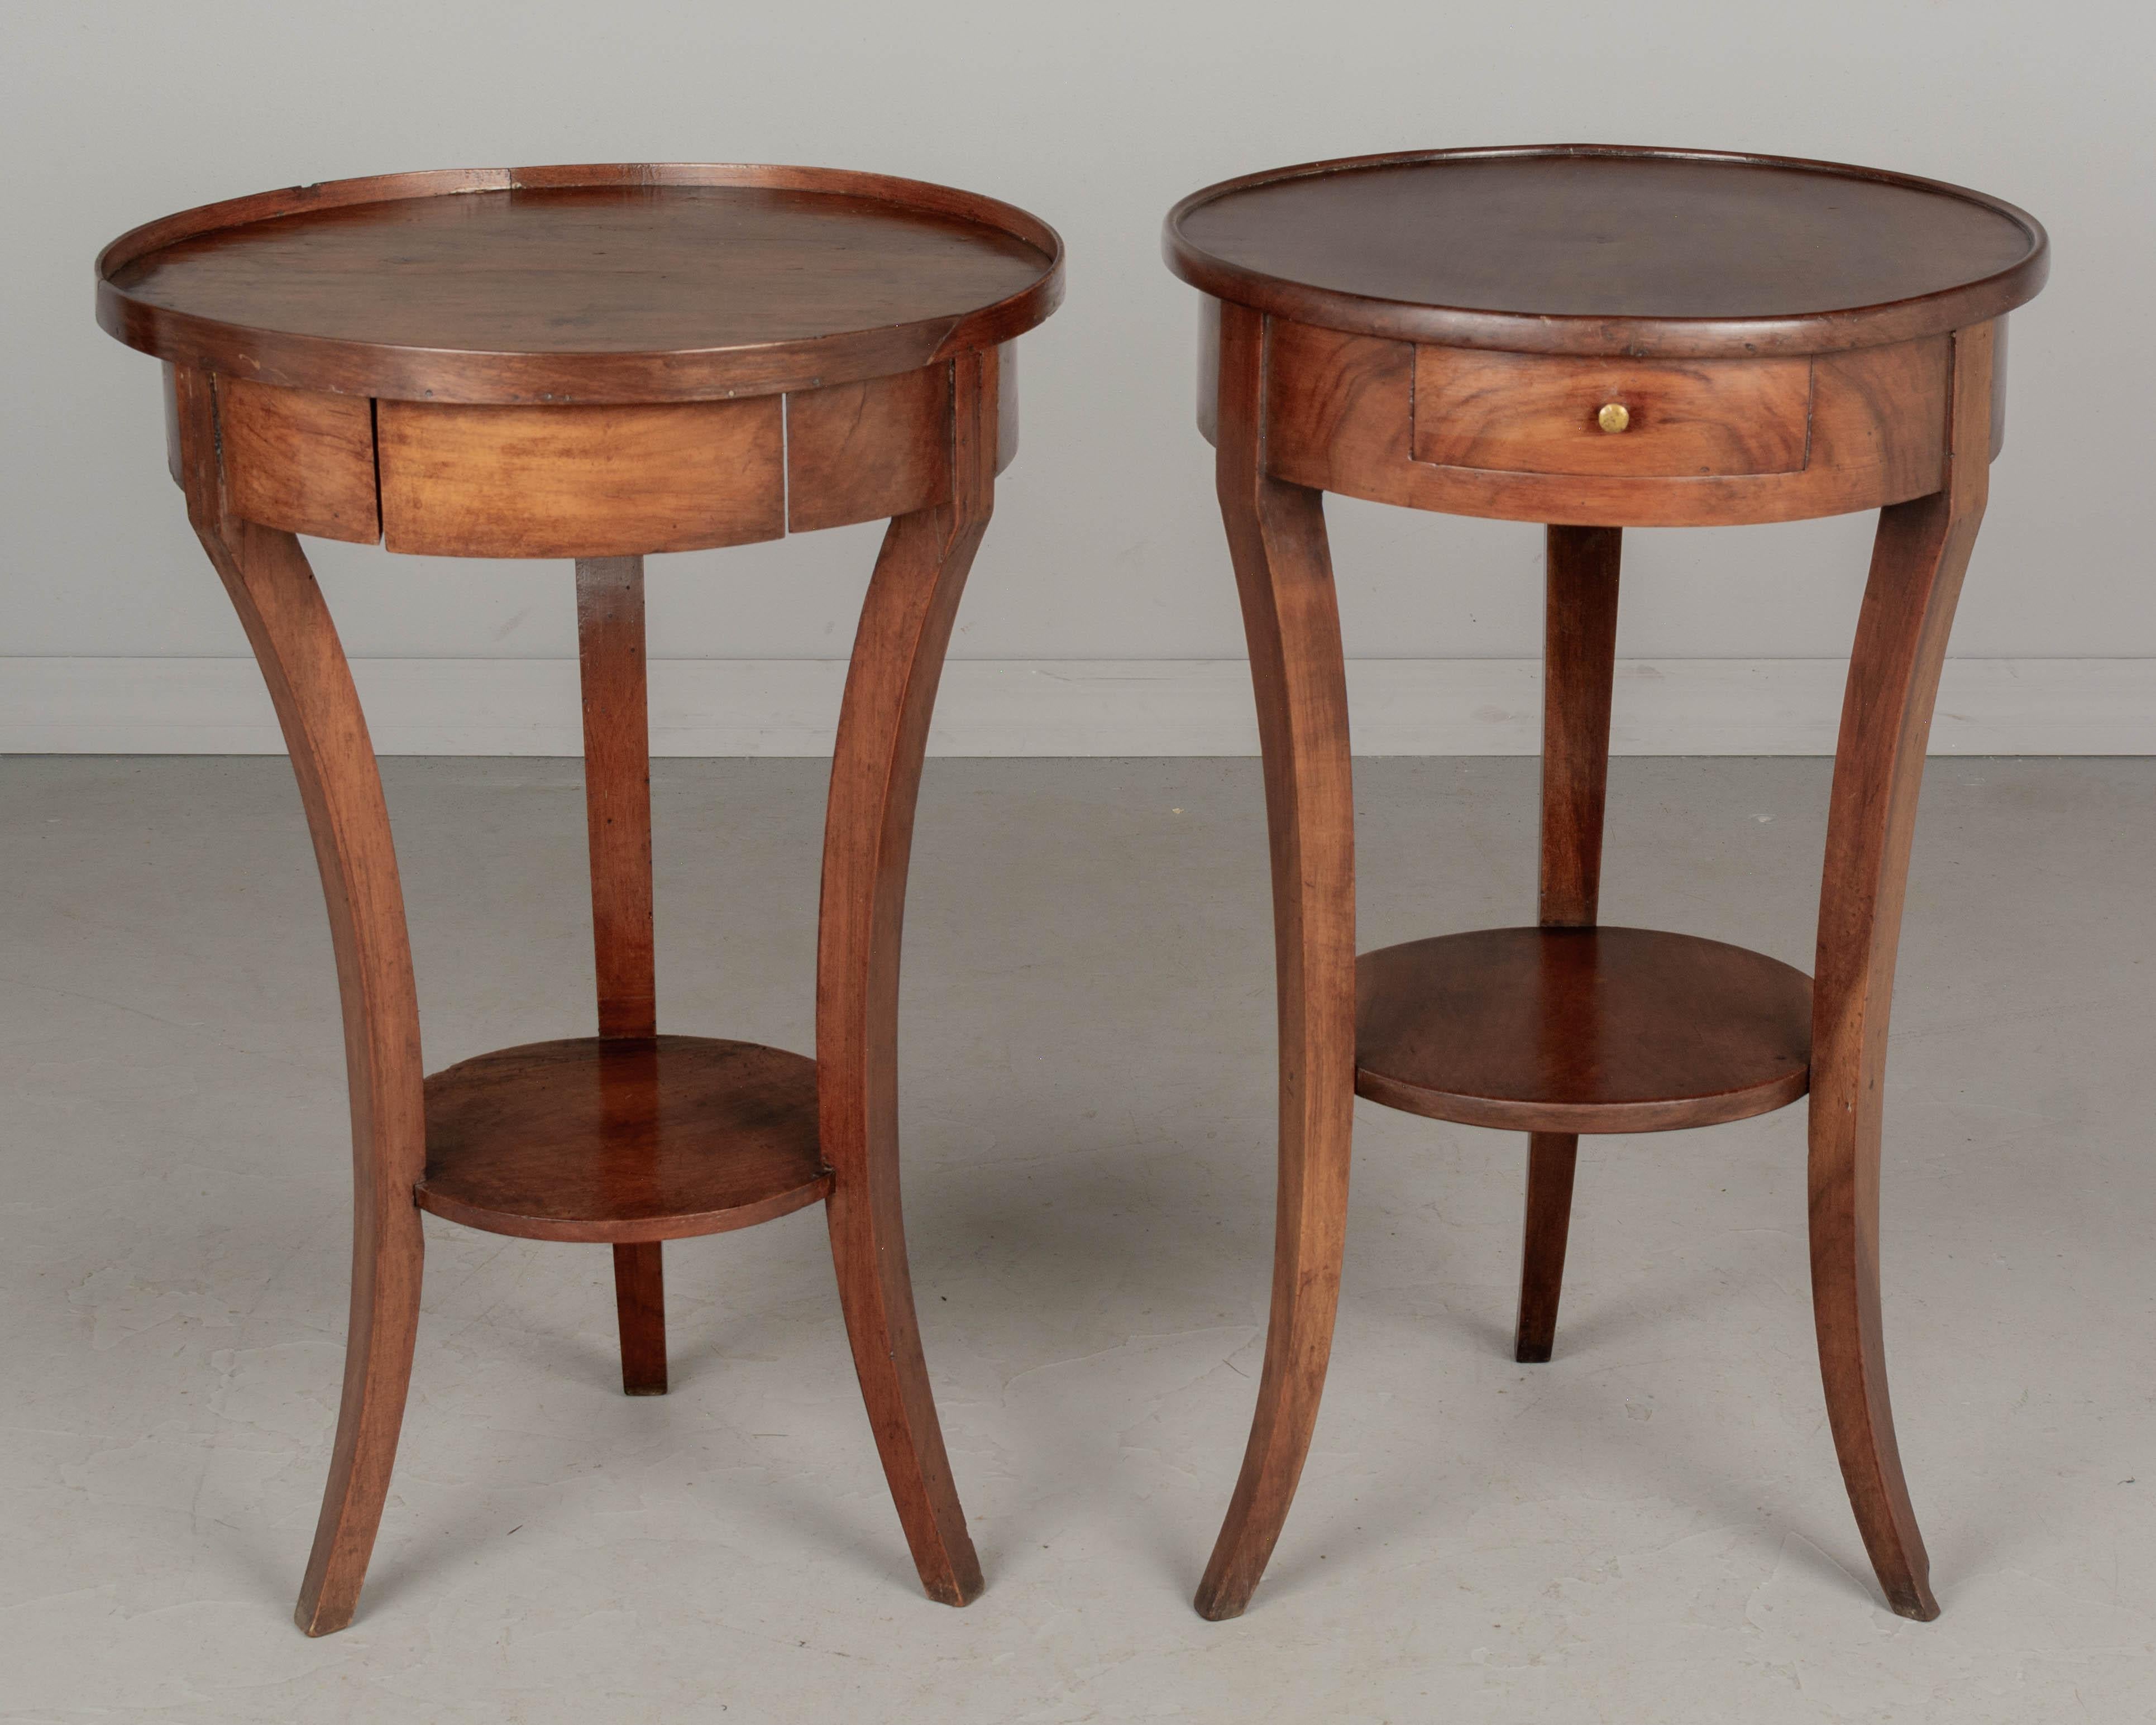 A set of two similar French walnut circular side tables, similar in scale, each with a dovetailed drawer, tripod base and lower shelf. One from the late 19th century and the other from the early 20th century. Each in good condition, the older one